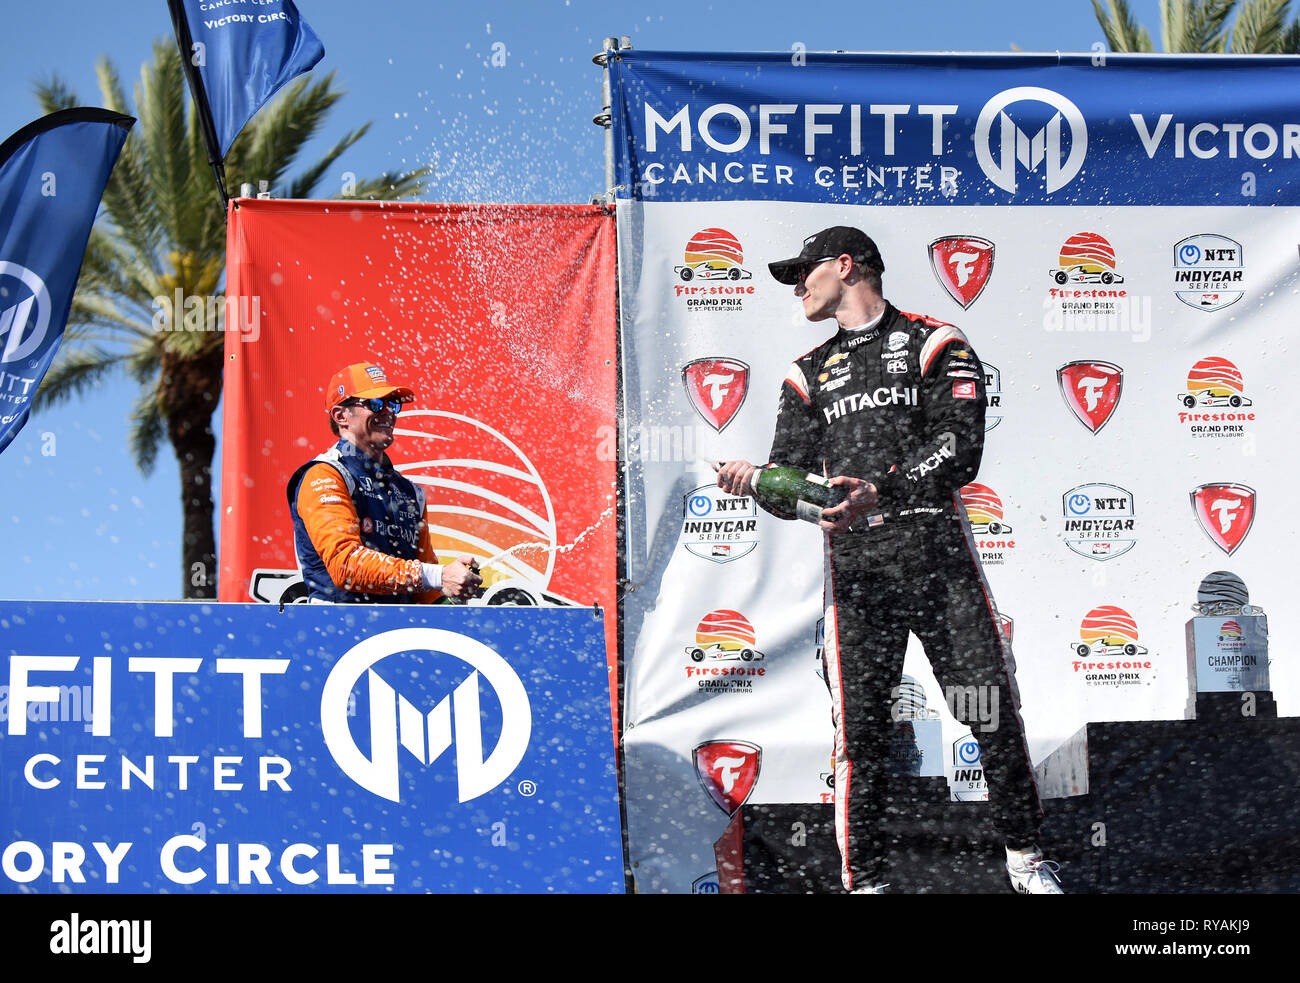 March 10, 2019 - St. Petersburg, Florida, United States - Team Penske driver Josef Newgarden of the United States (right), winner of the Firestone Grand Prix of St. Petersburg,  and Chip Ganassi Racing driver Scott Dixon of New Zealand, who finished second, spray each other with champagne on March 10, 2019 in St. Petersburg, Florida. (Paul Hennessy/Alamy) Stock Photo